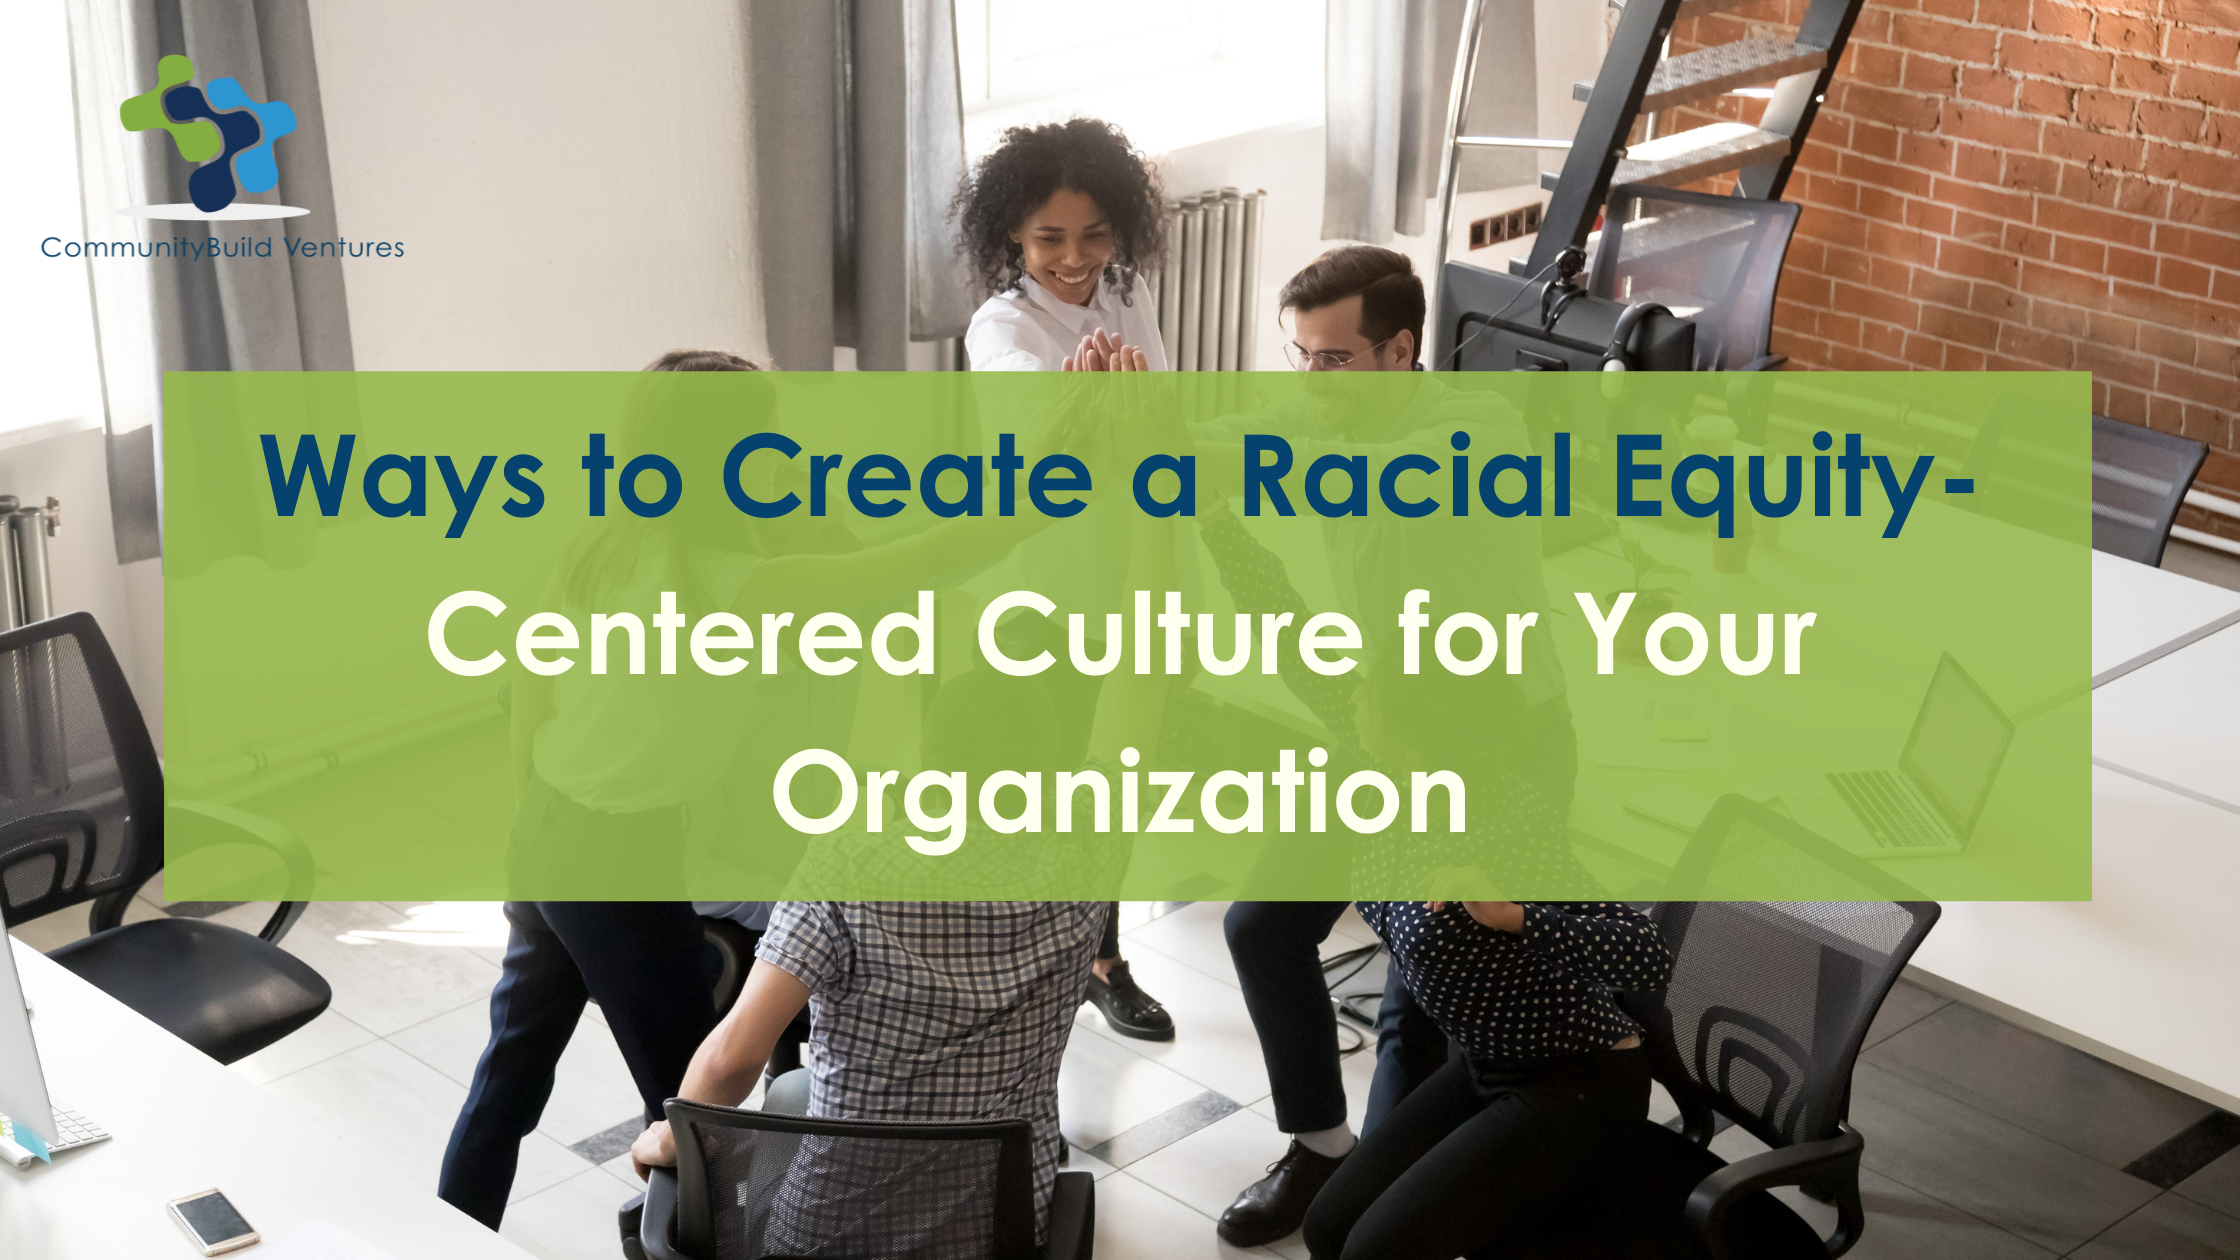 Ways to Create a Racial Equity-Centered Culture for Your Organization